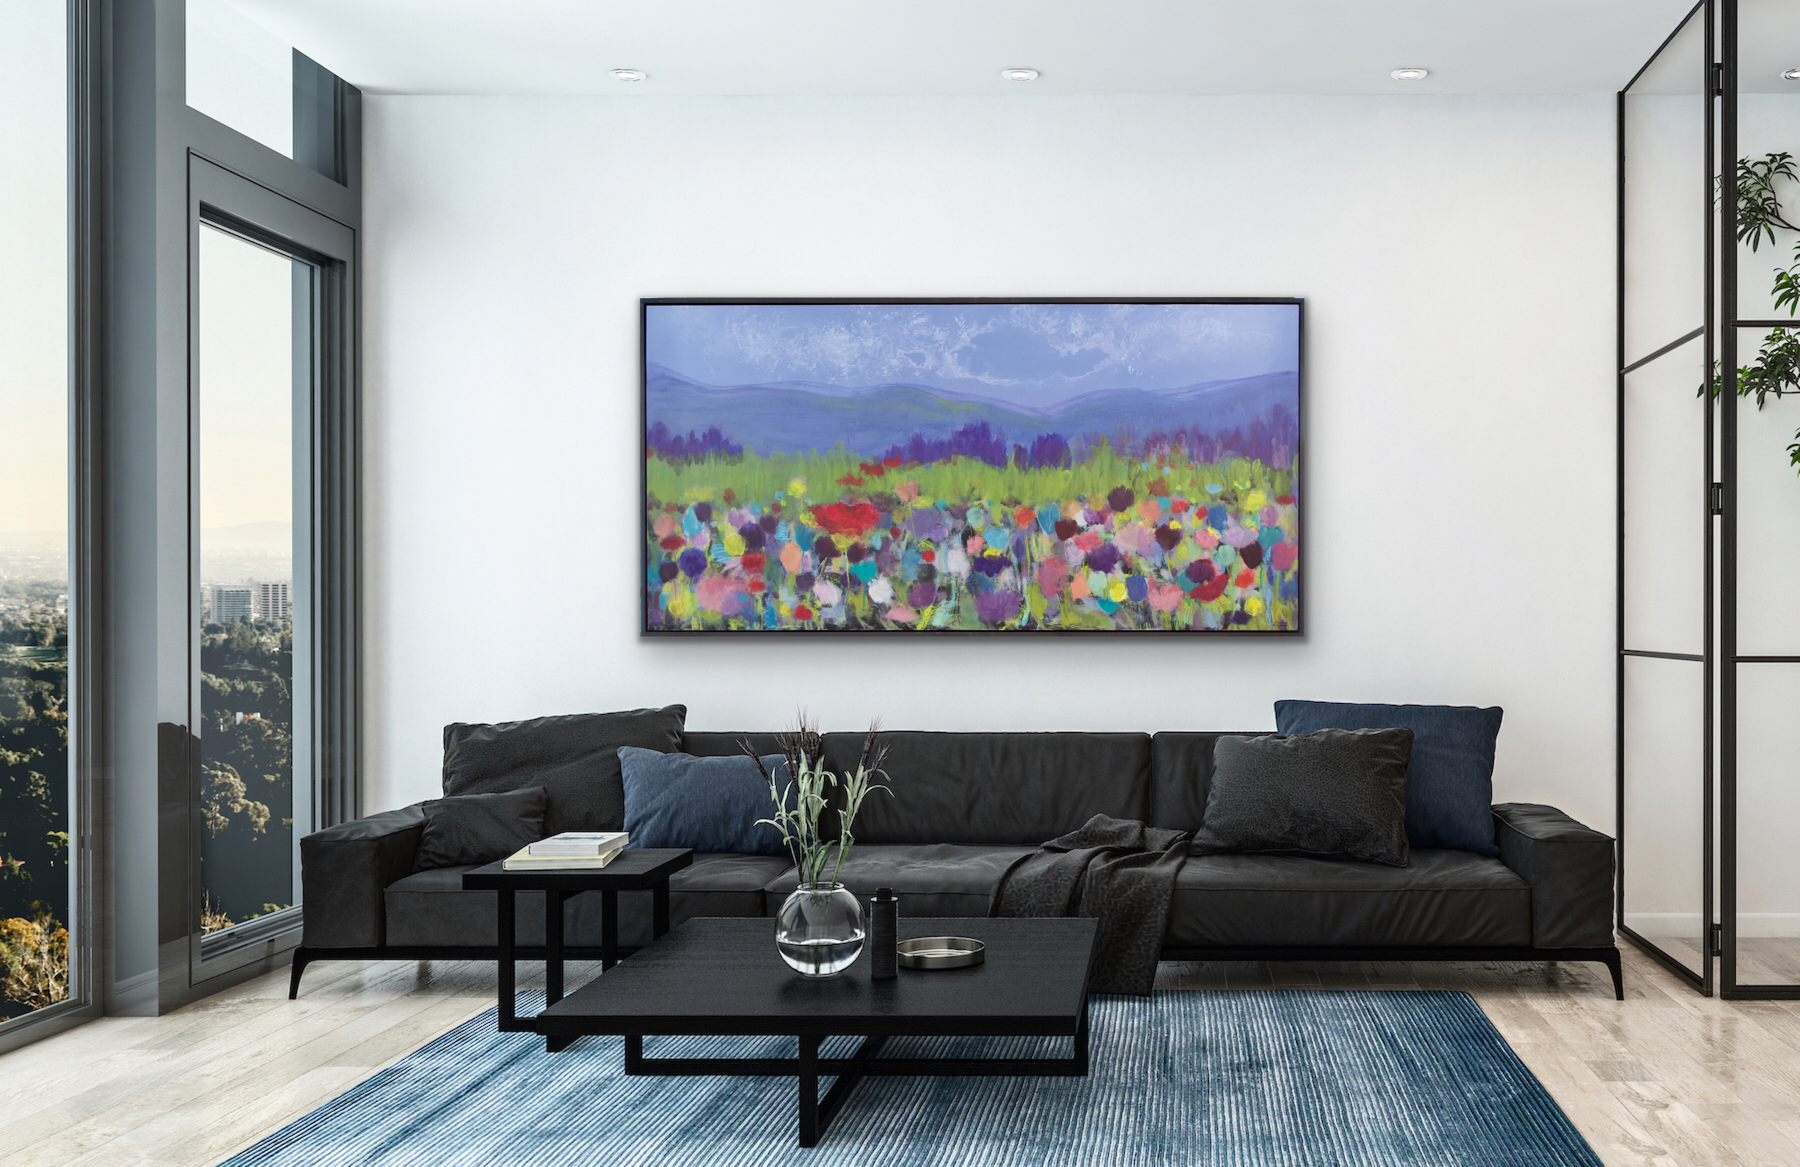 This large landscape statement piece will encourage thought and conversation is displayed in a living room setting above a large black sofa.